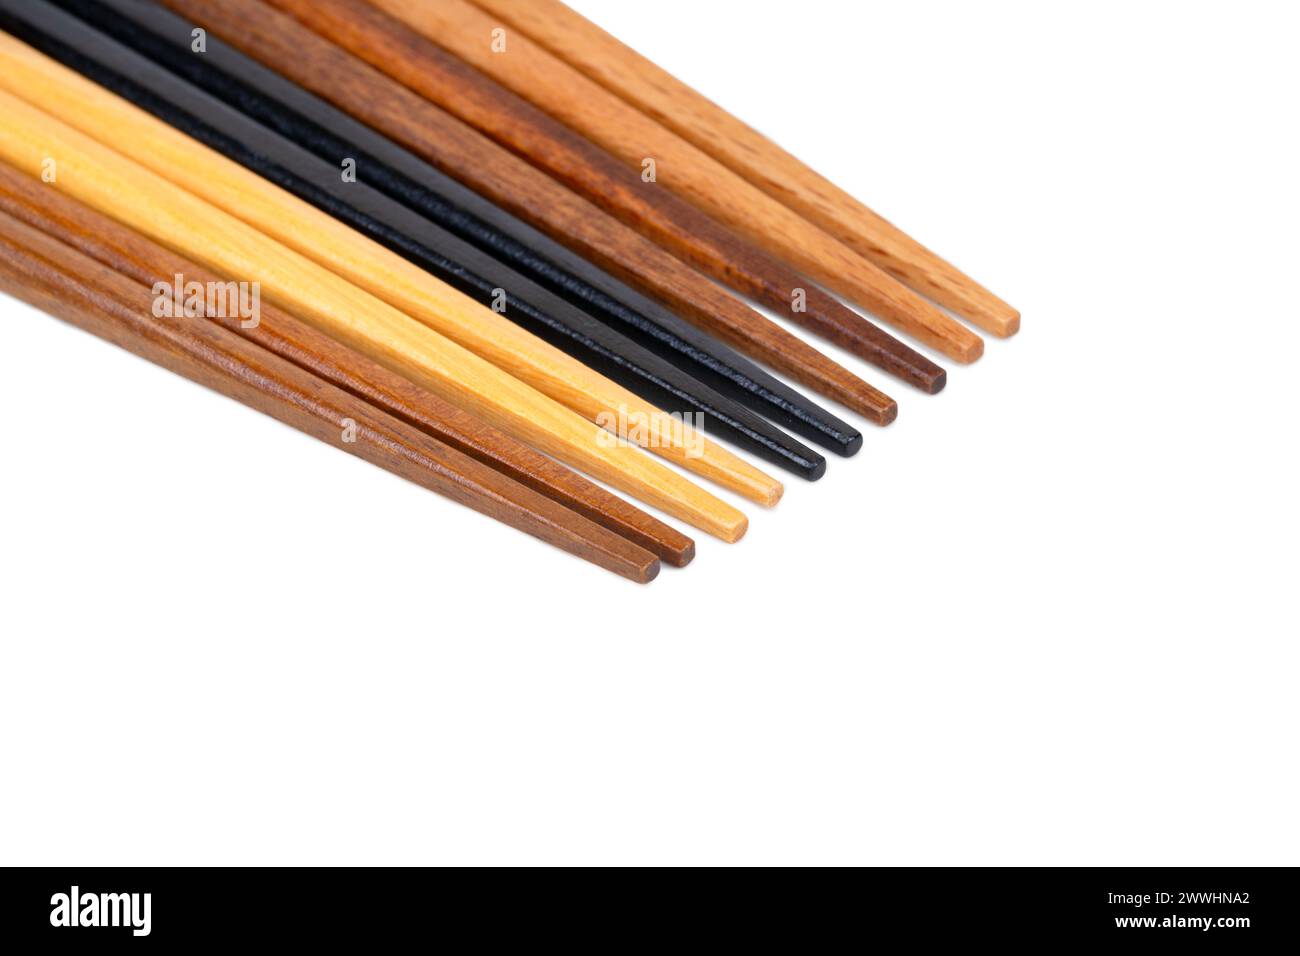 Multi-colored wooden Chinese chopsticks, close-up Stock Photo